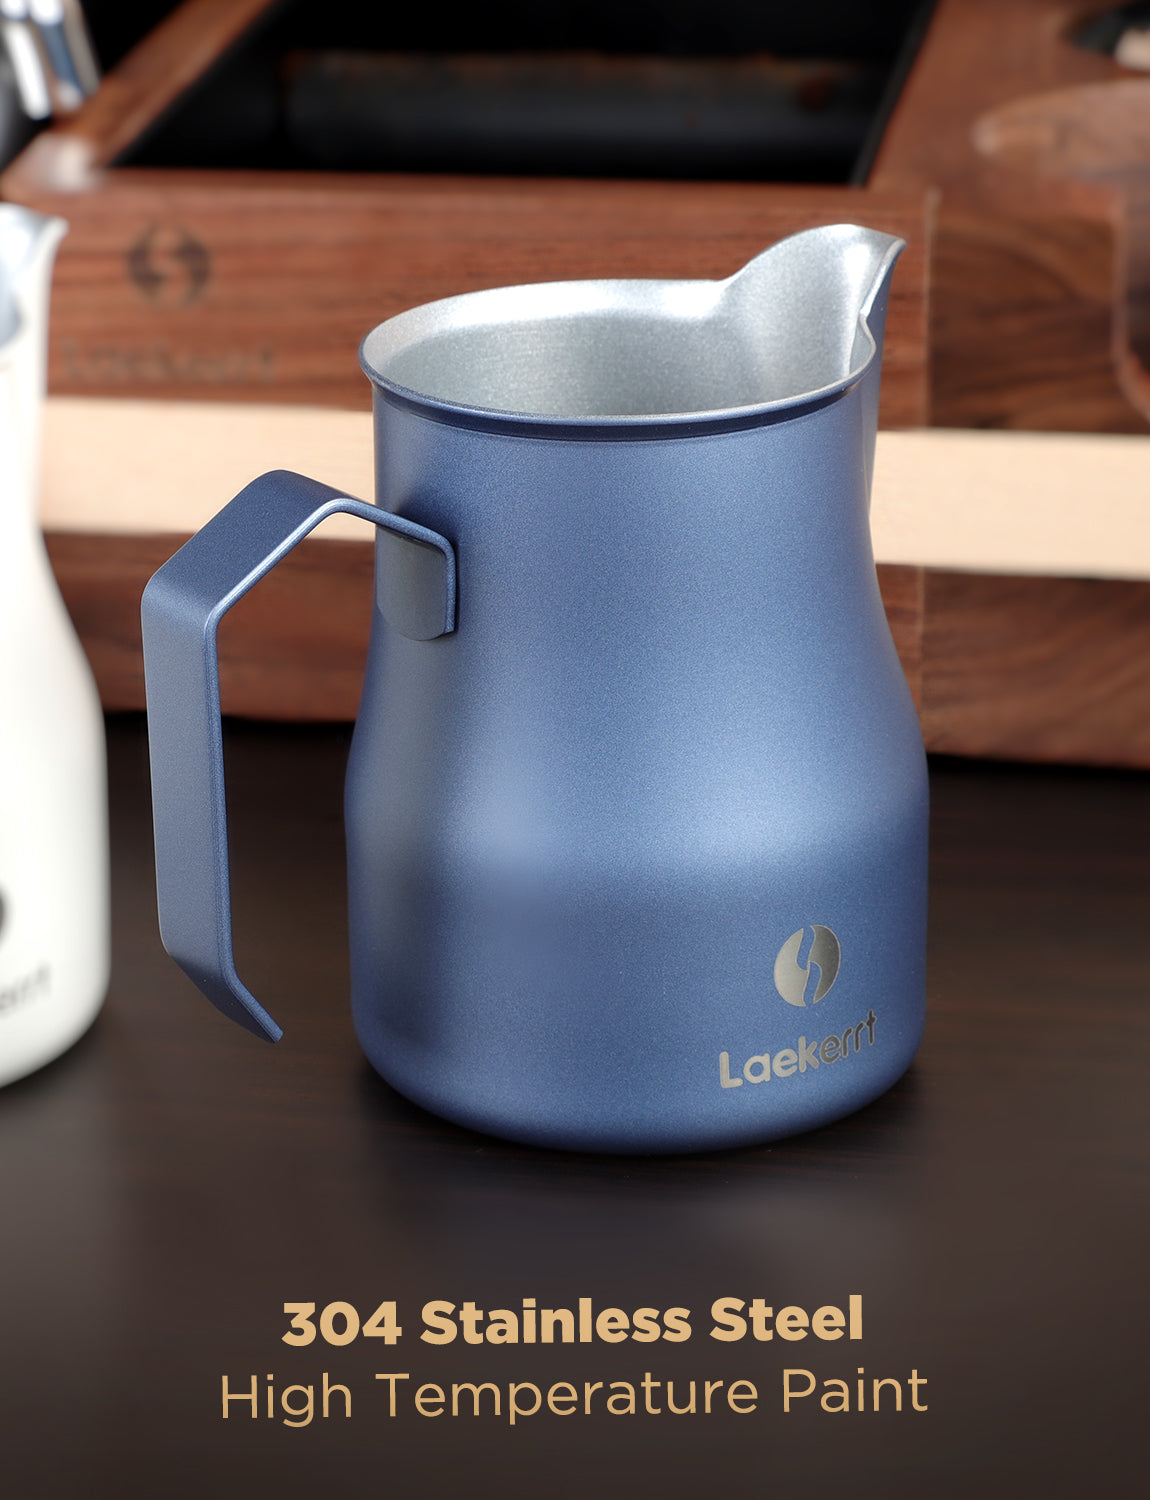 Laekerrt Milk Frothing Pitcher, Stainless Steel Coffee Tools Cup, Milk Frother Cup, Coffee Steaming Pitcher, Perfect Espresso Machine Accessories, Barista Tools, Latte Art, Navy Blue 12 Oz (350ml)